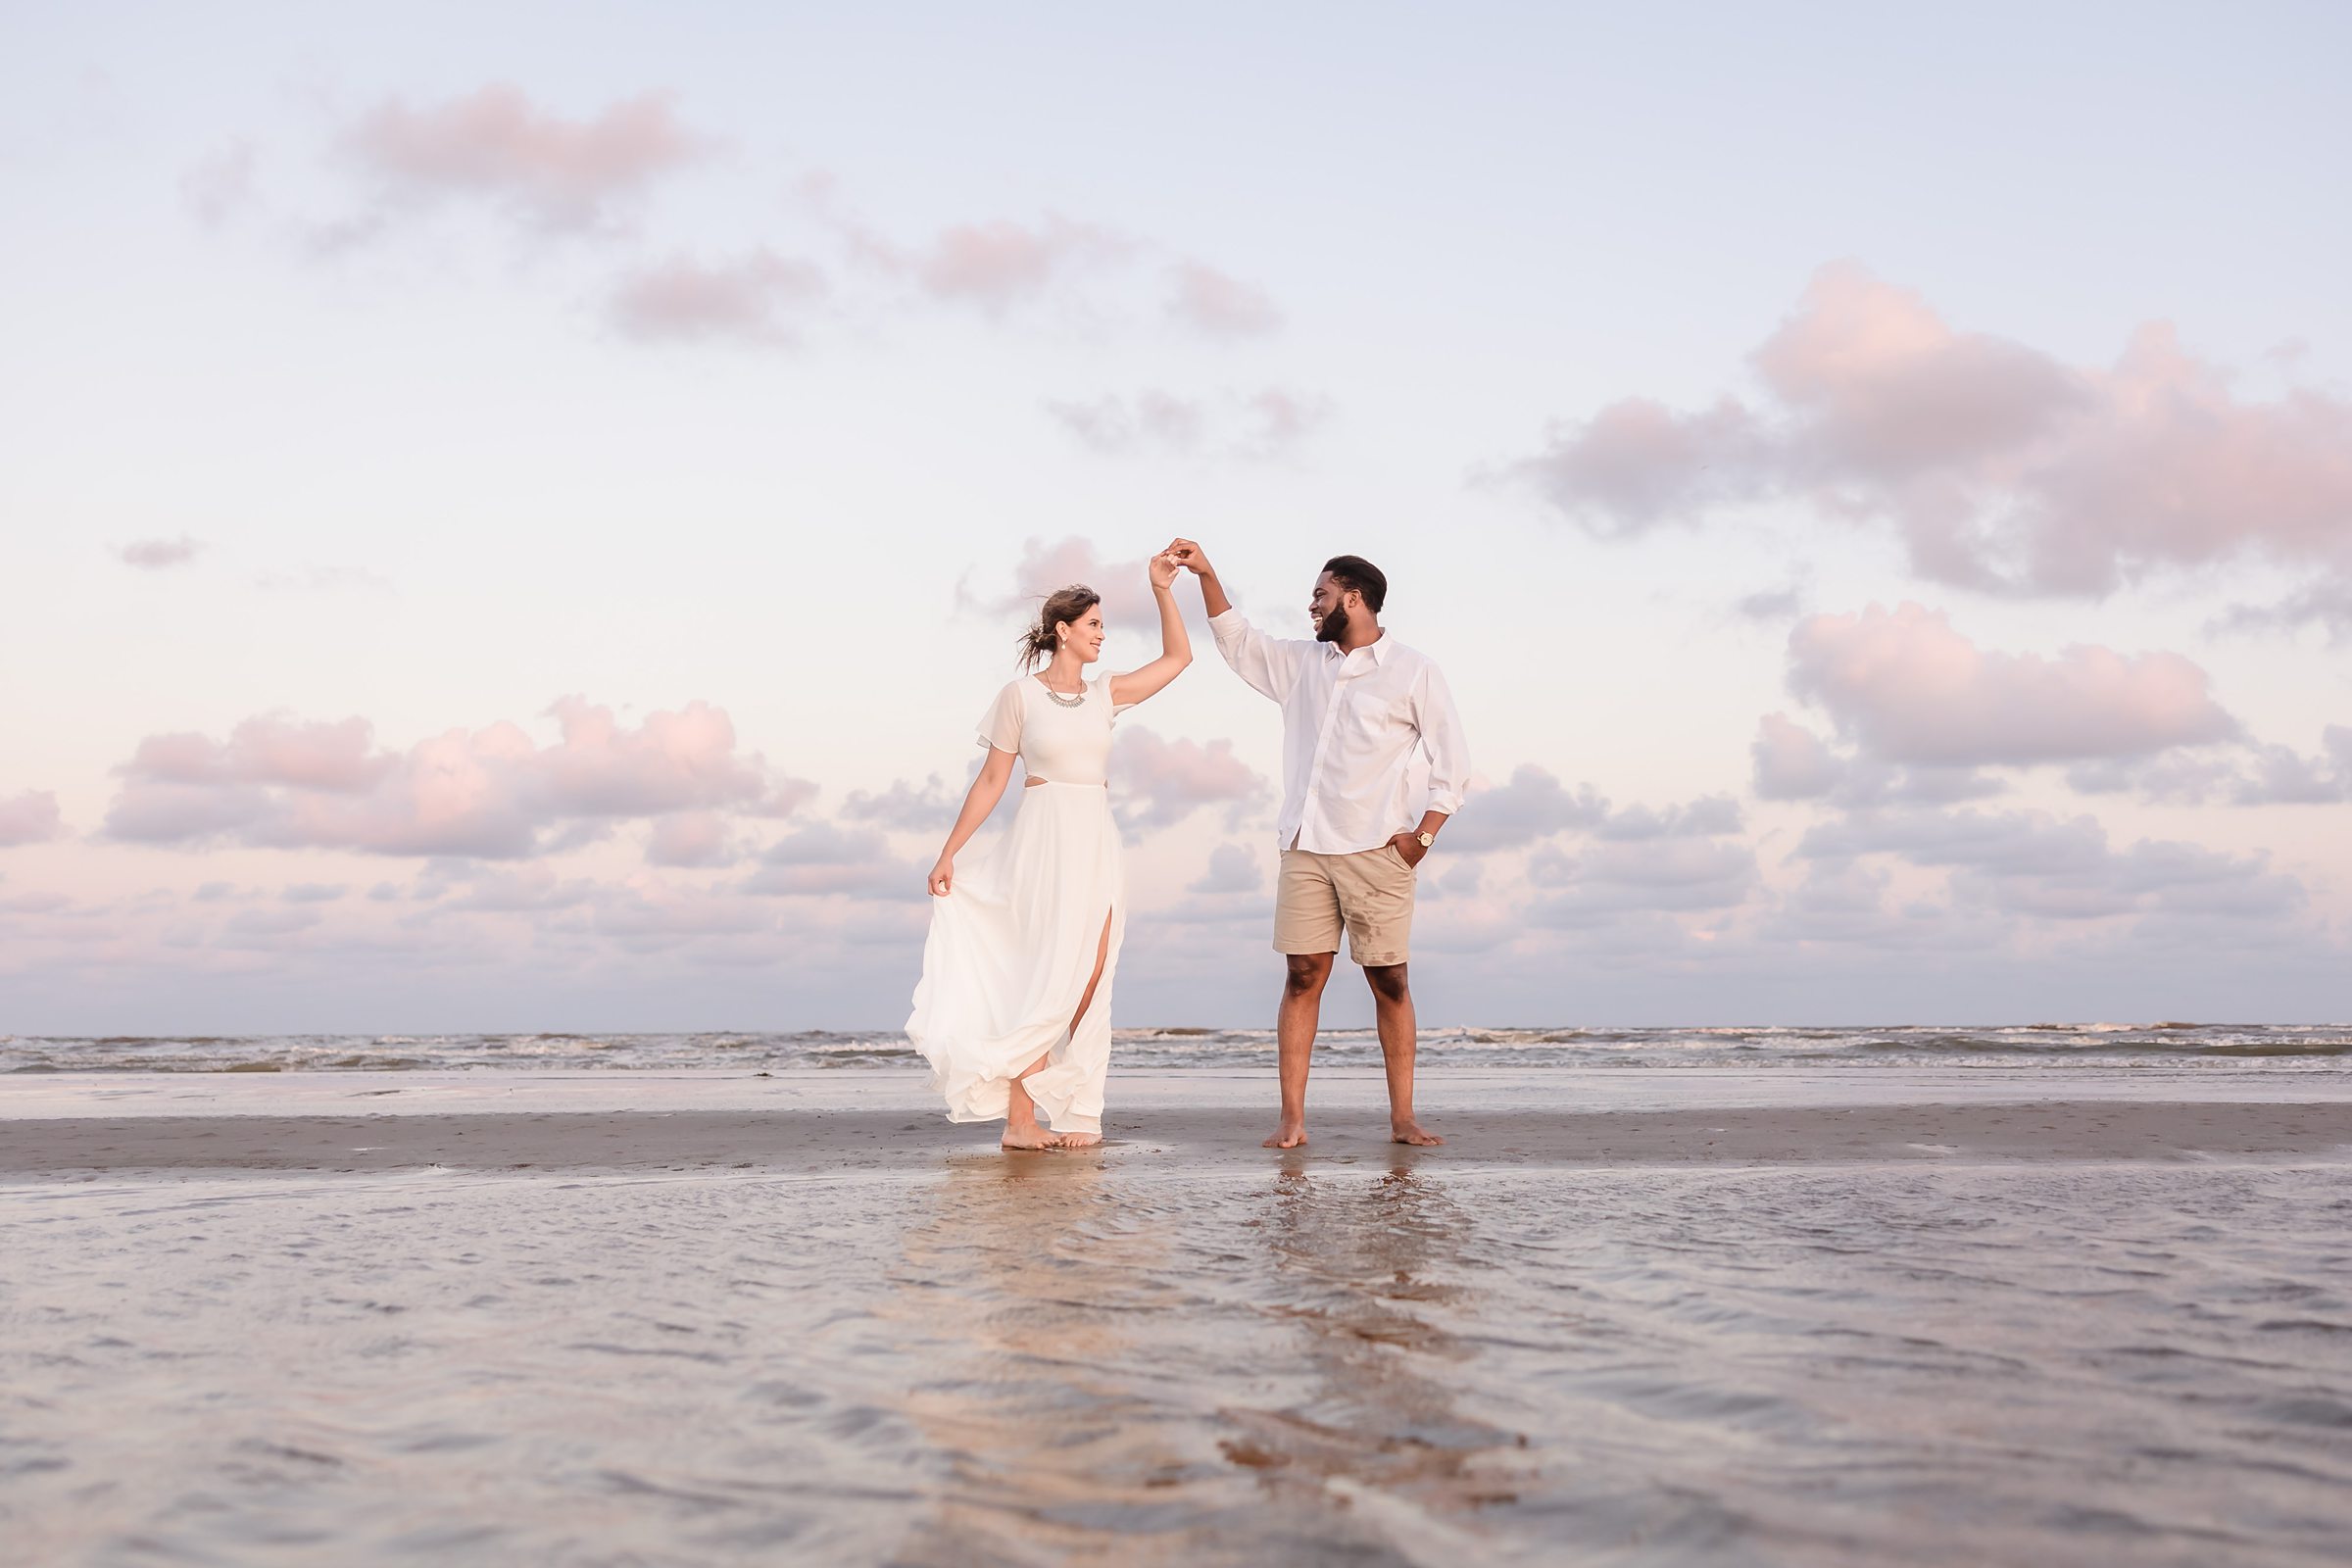 Couple twirl in the ocean during their session at Galveston Beach in Texas.